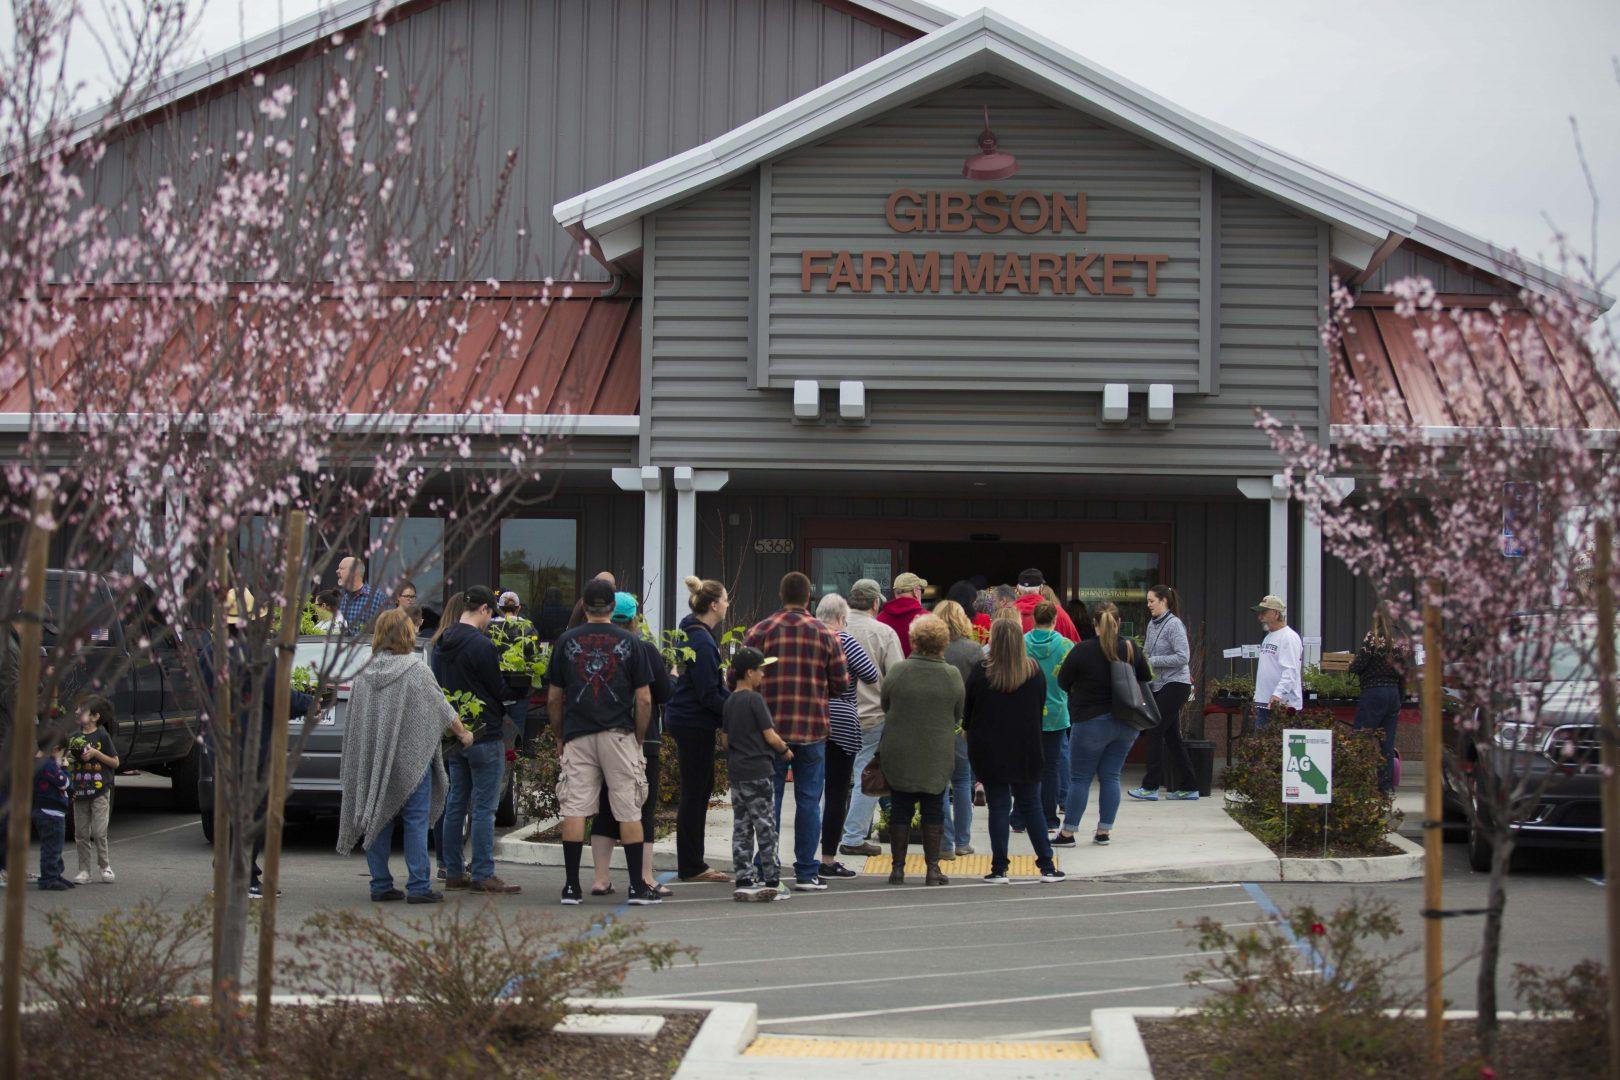 Patrons+of+the+Gibson+Market+wait+patiently+in+line+in+order+to+receive+their+deals+on+plants+during+Gibson+Market+Spring+Plant+Sale+on+March+10%2C+2018.+The+annual+sale+is+hosted+by+the+Fresno+State+Horticulture+Nursery+and+provides+the+public+with+special+priced+organic+and+conventional+spring+plants.+%28Benjamin+Cruz%2FThe+Collegian%29